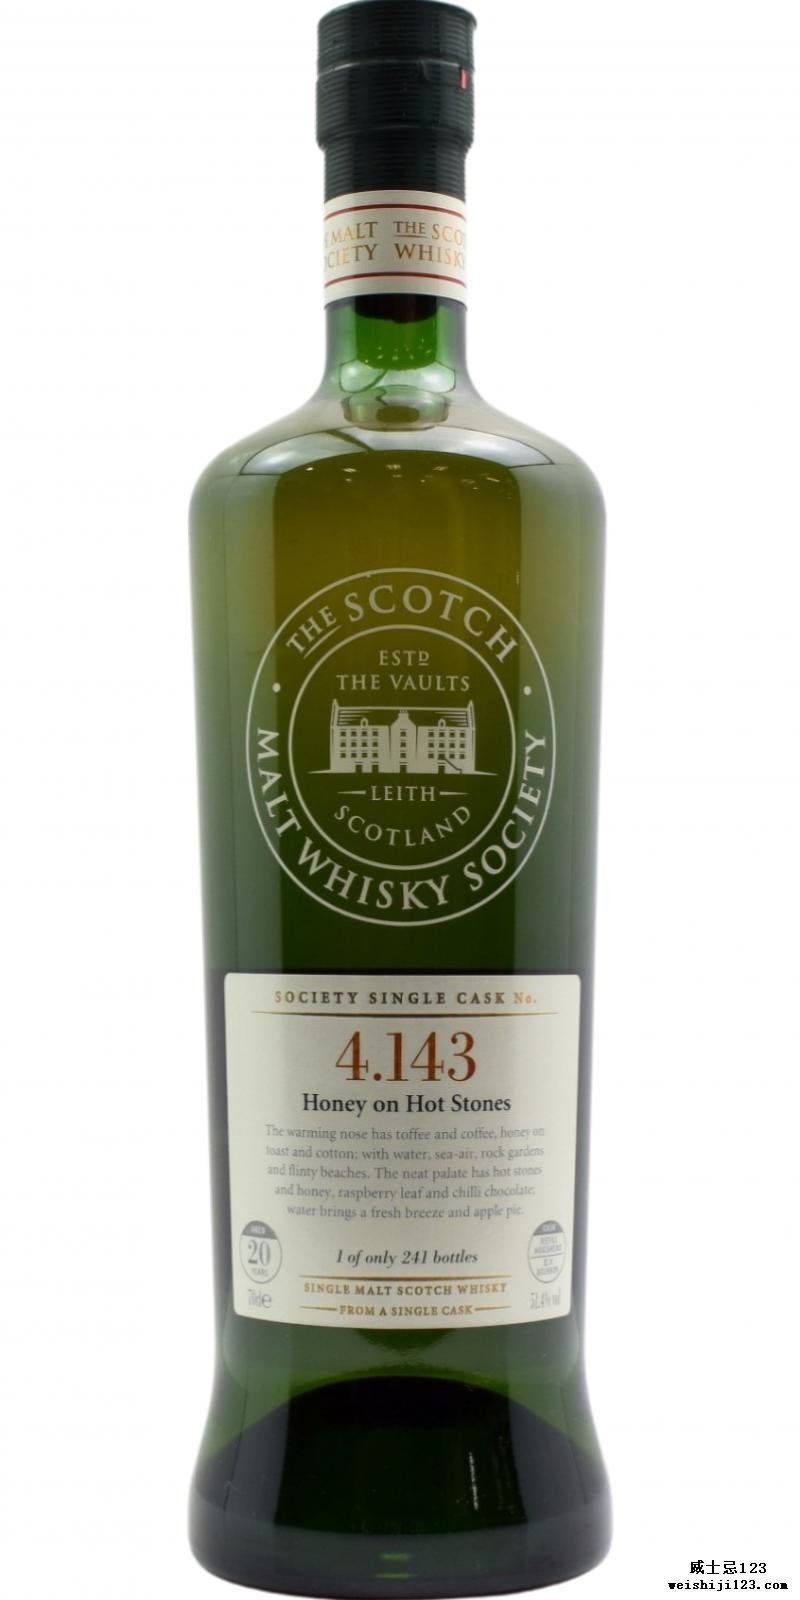 Highland Park 20-year-old SMWS 4.143